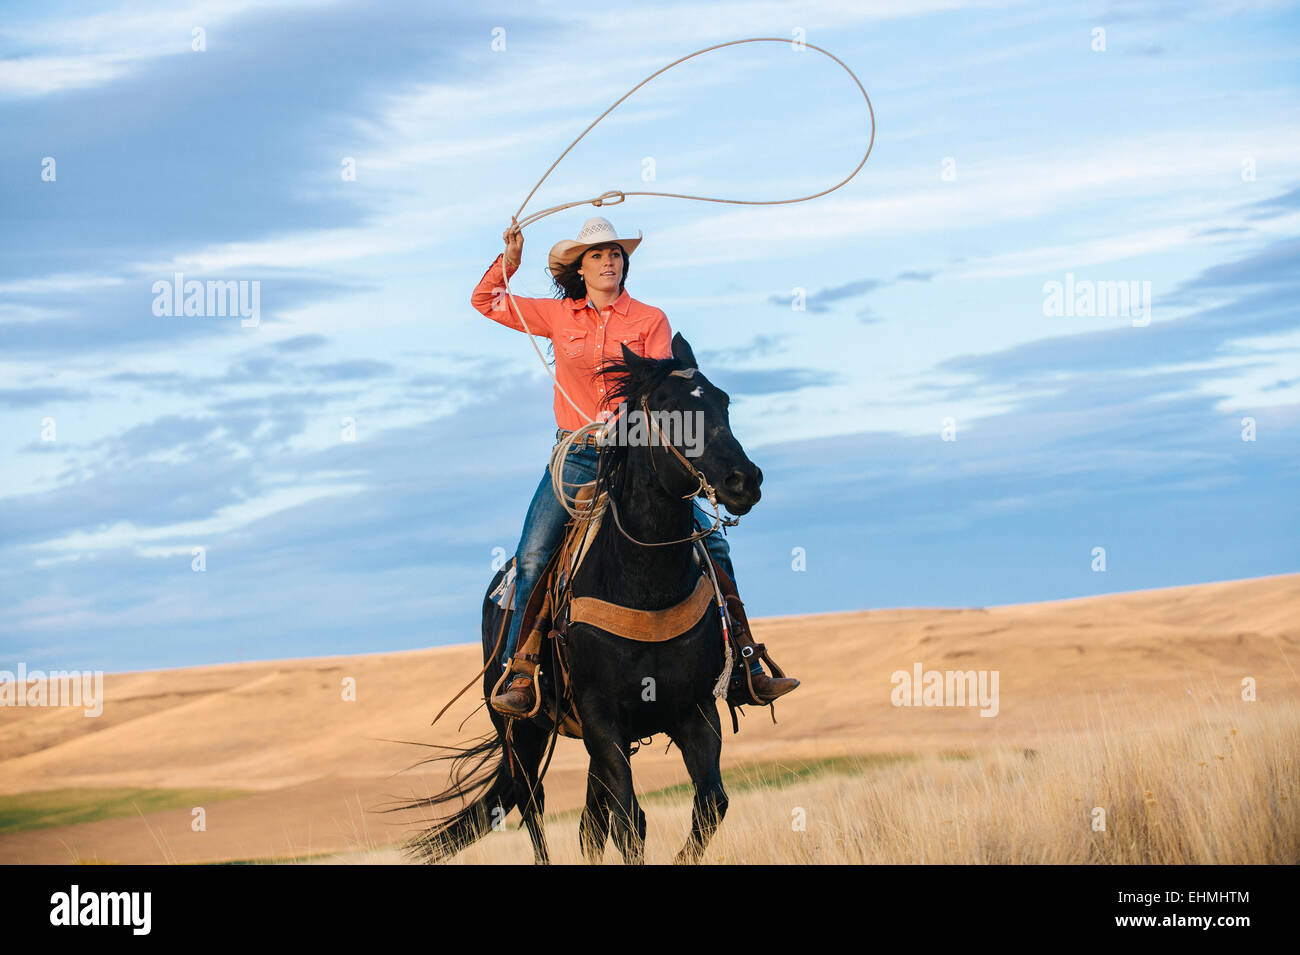 Caucasian woman on horse throwing lasso in grassy field Stock Photo